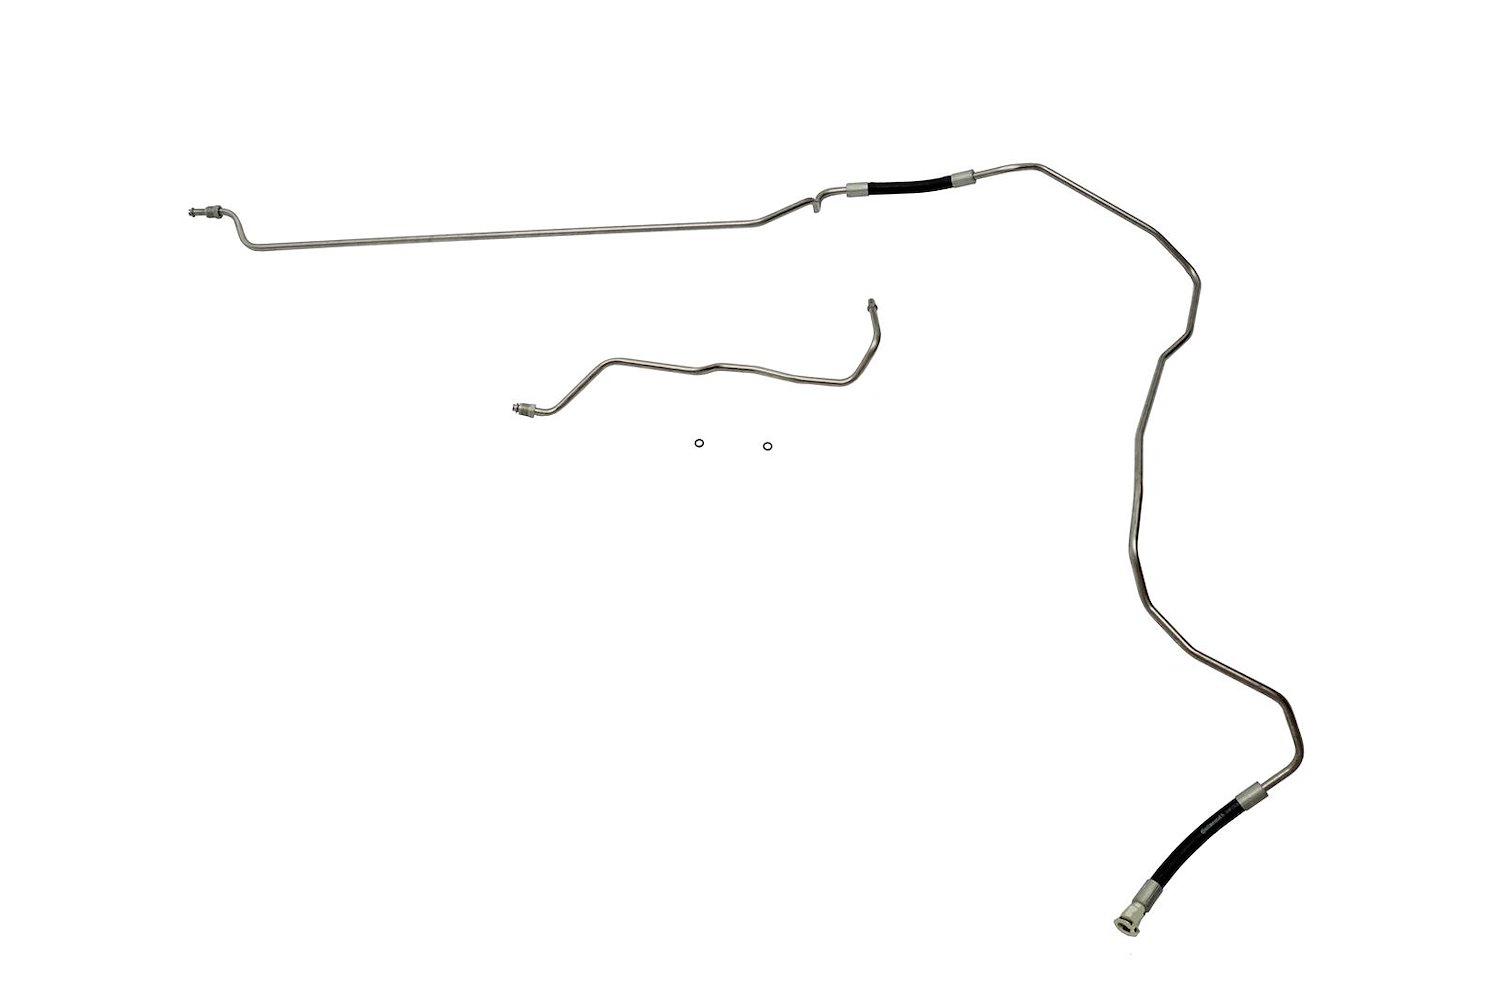 Chevy / GMC Pick Up Fuel Supply Line -2000